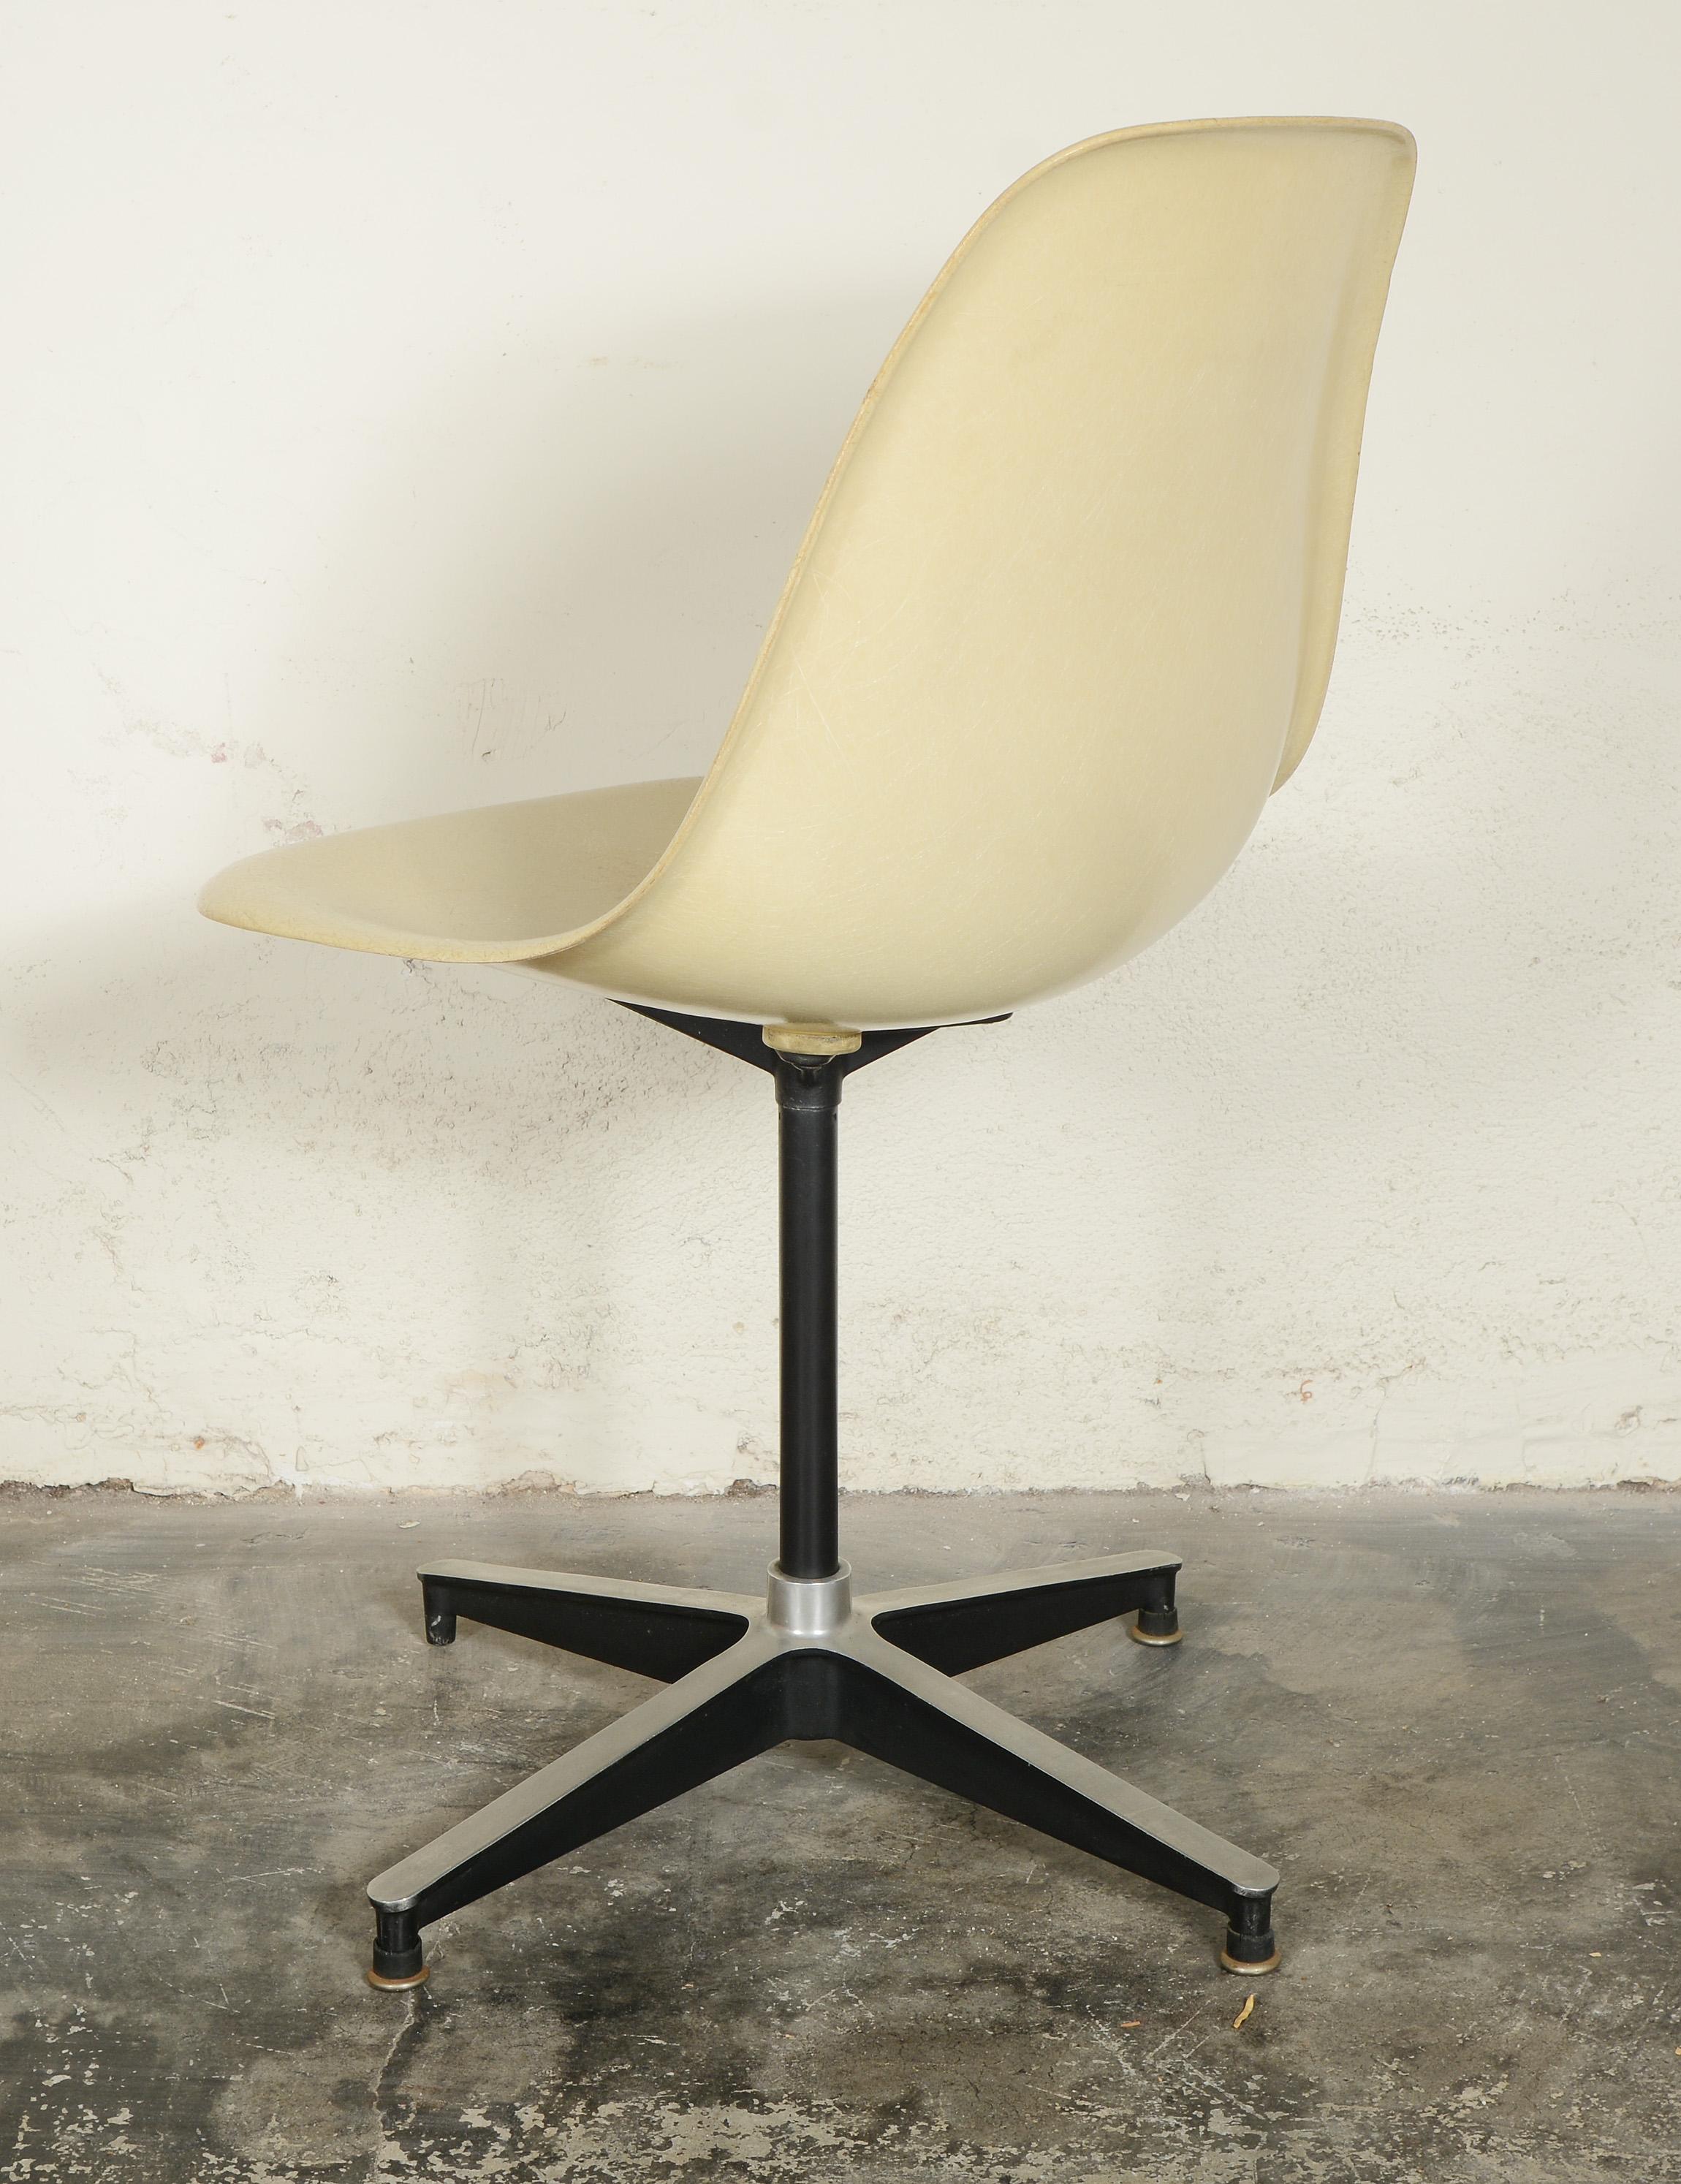 Pivoting base fiberglass side chair by Charles and Ray Eames. The Eames lounge and ottoman was being developed at the time this chair was introduced. The 671 ottoman base was used on these early versions. The aluminum group base would be beginning